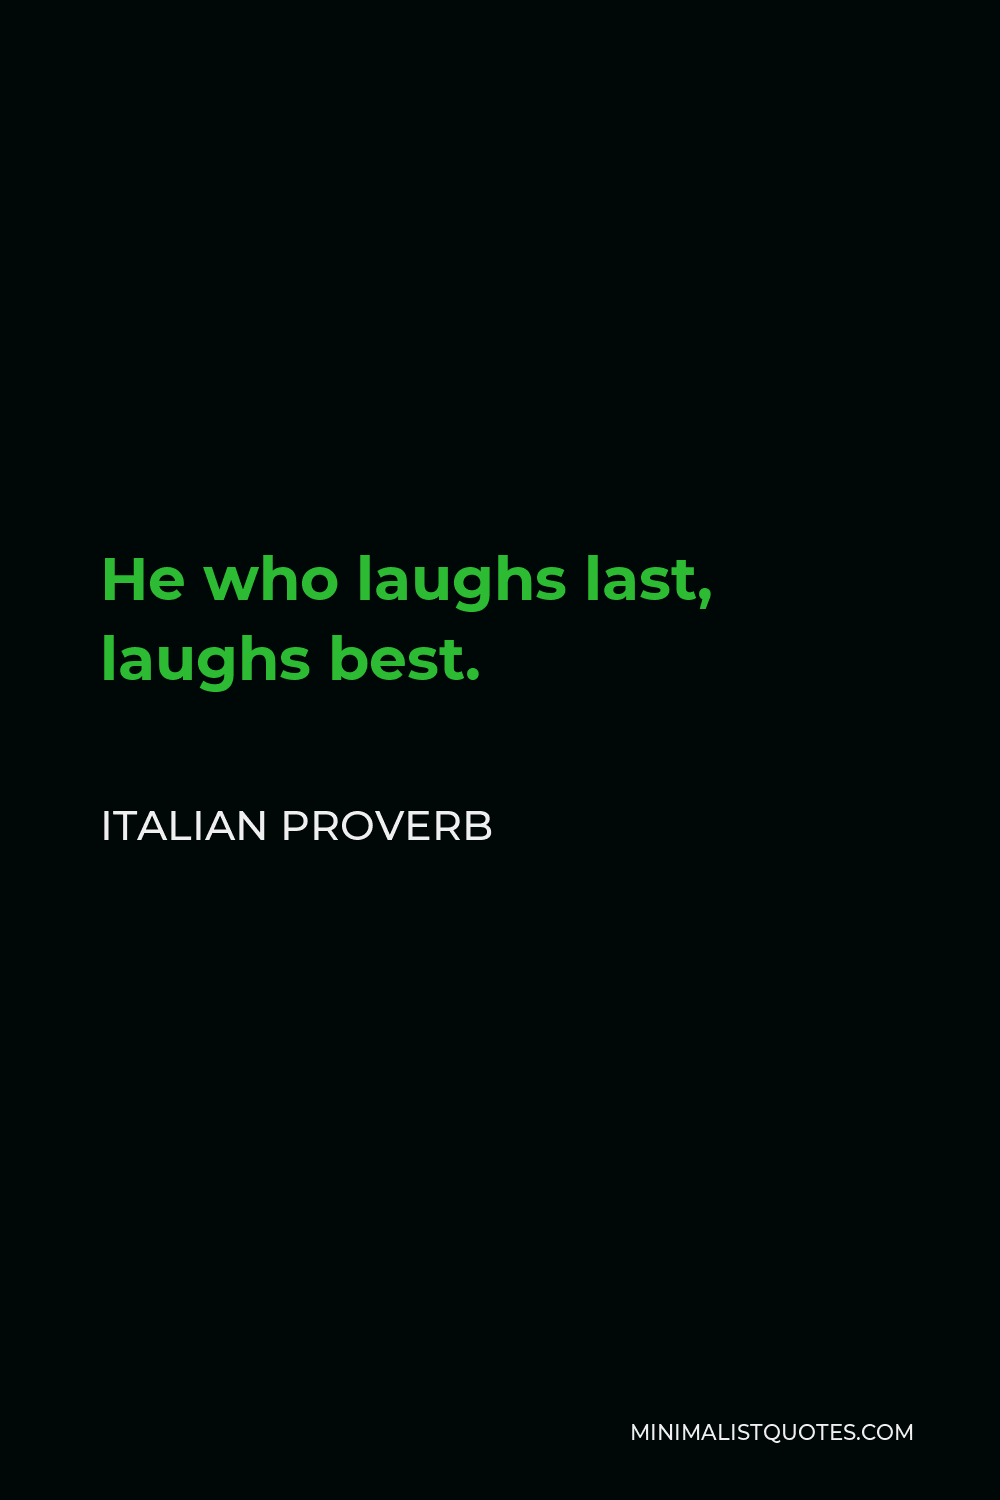 Italian Proverb Quote - He who laughs last, laughs best.